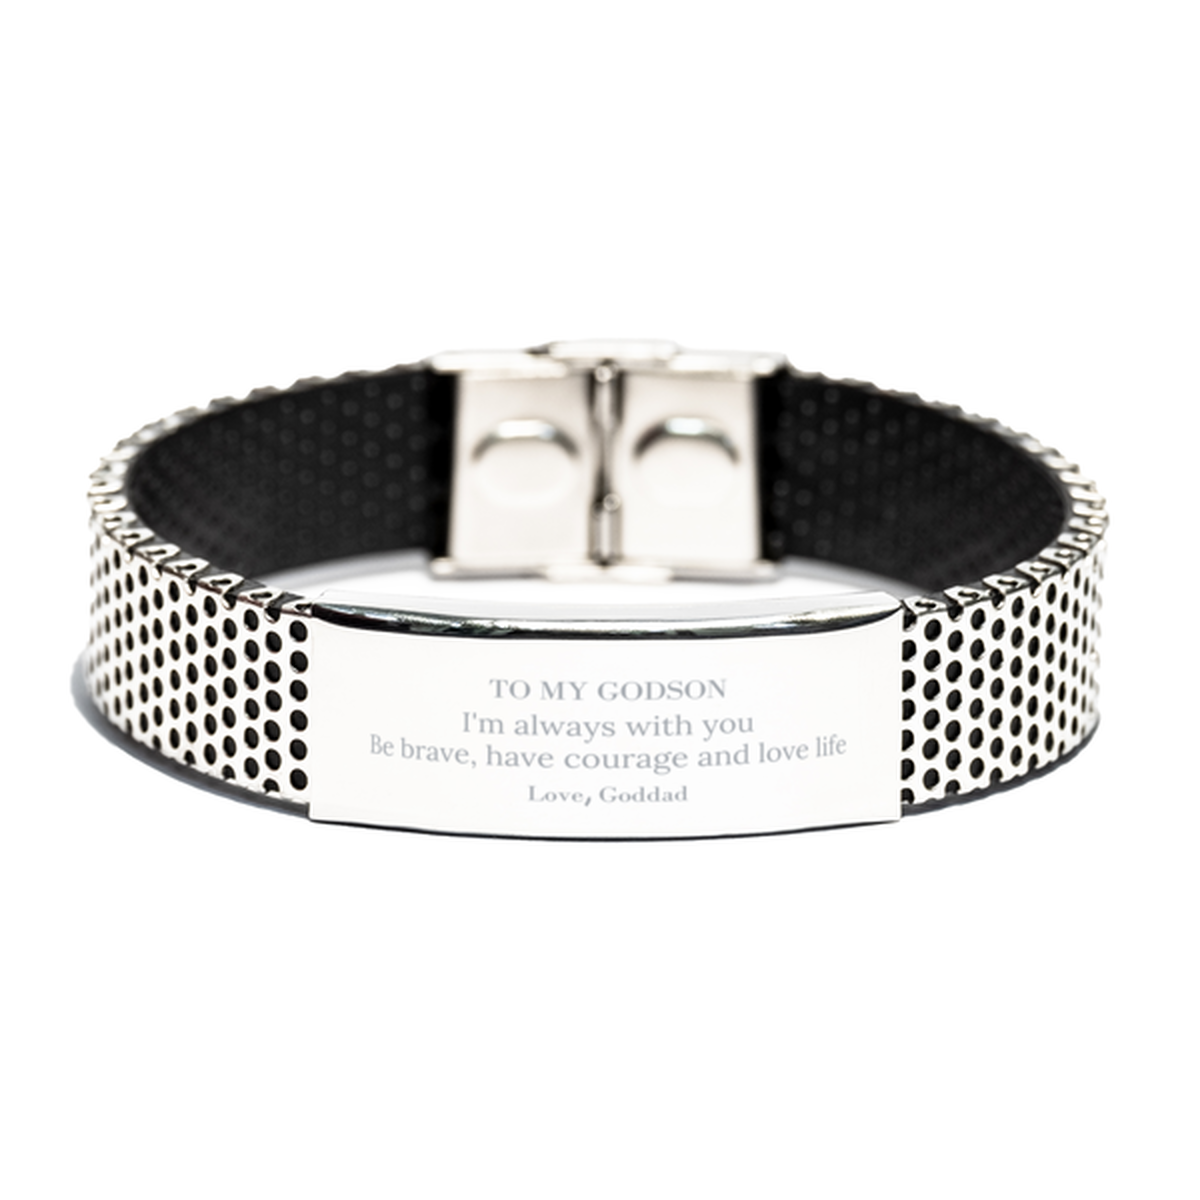 To My Godson Gifts from Goddad, Unique Stainless Steel Bracelet Inspirational Christmas Birthday Graduation Gifts for Godson I'm always with you. Be brave, have courage and love life. Love, Goddad